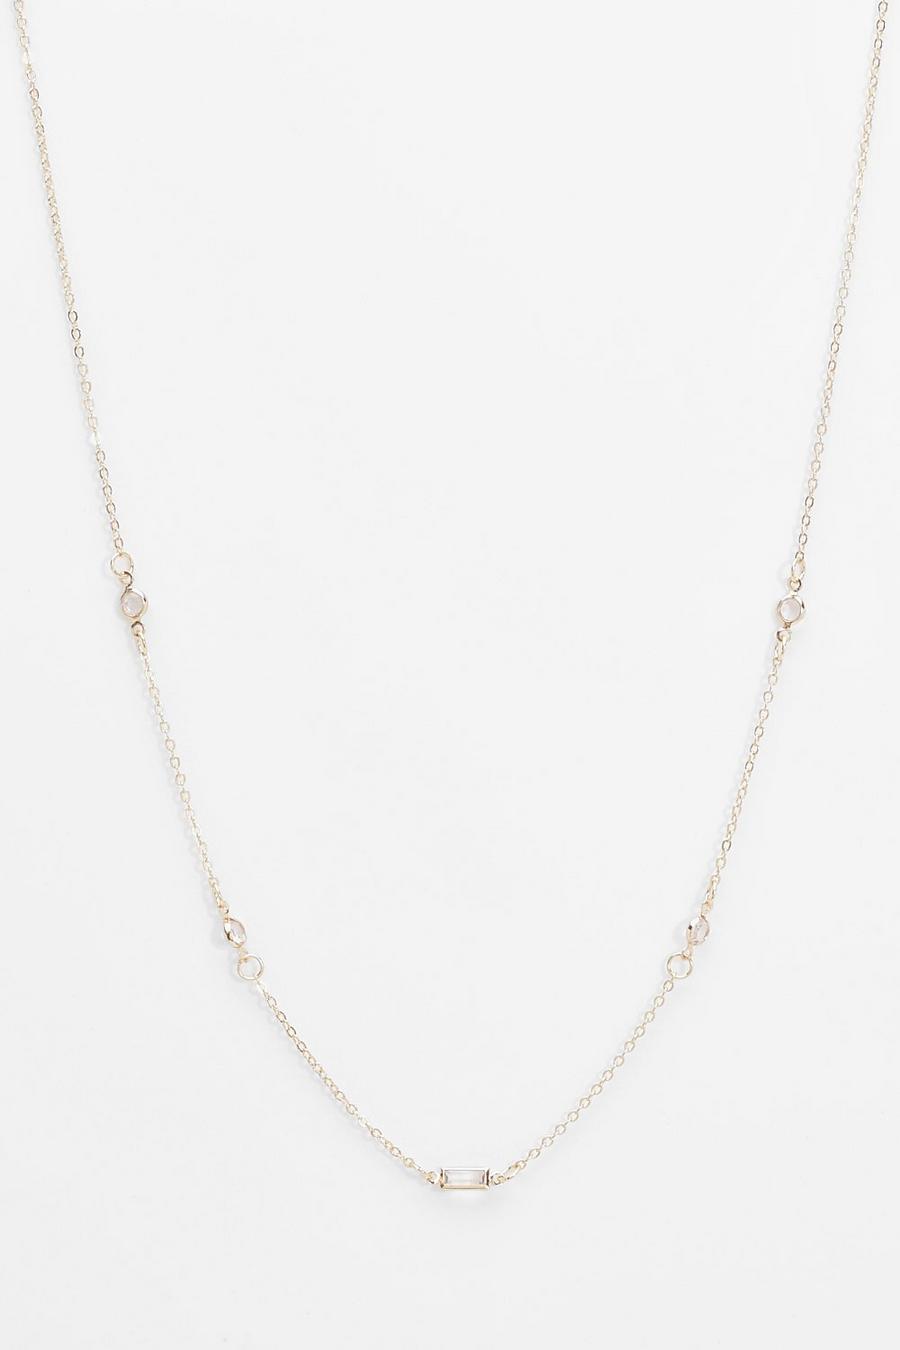 Gold metallic Emerald Cut Besel Chain Necklace